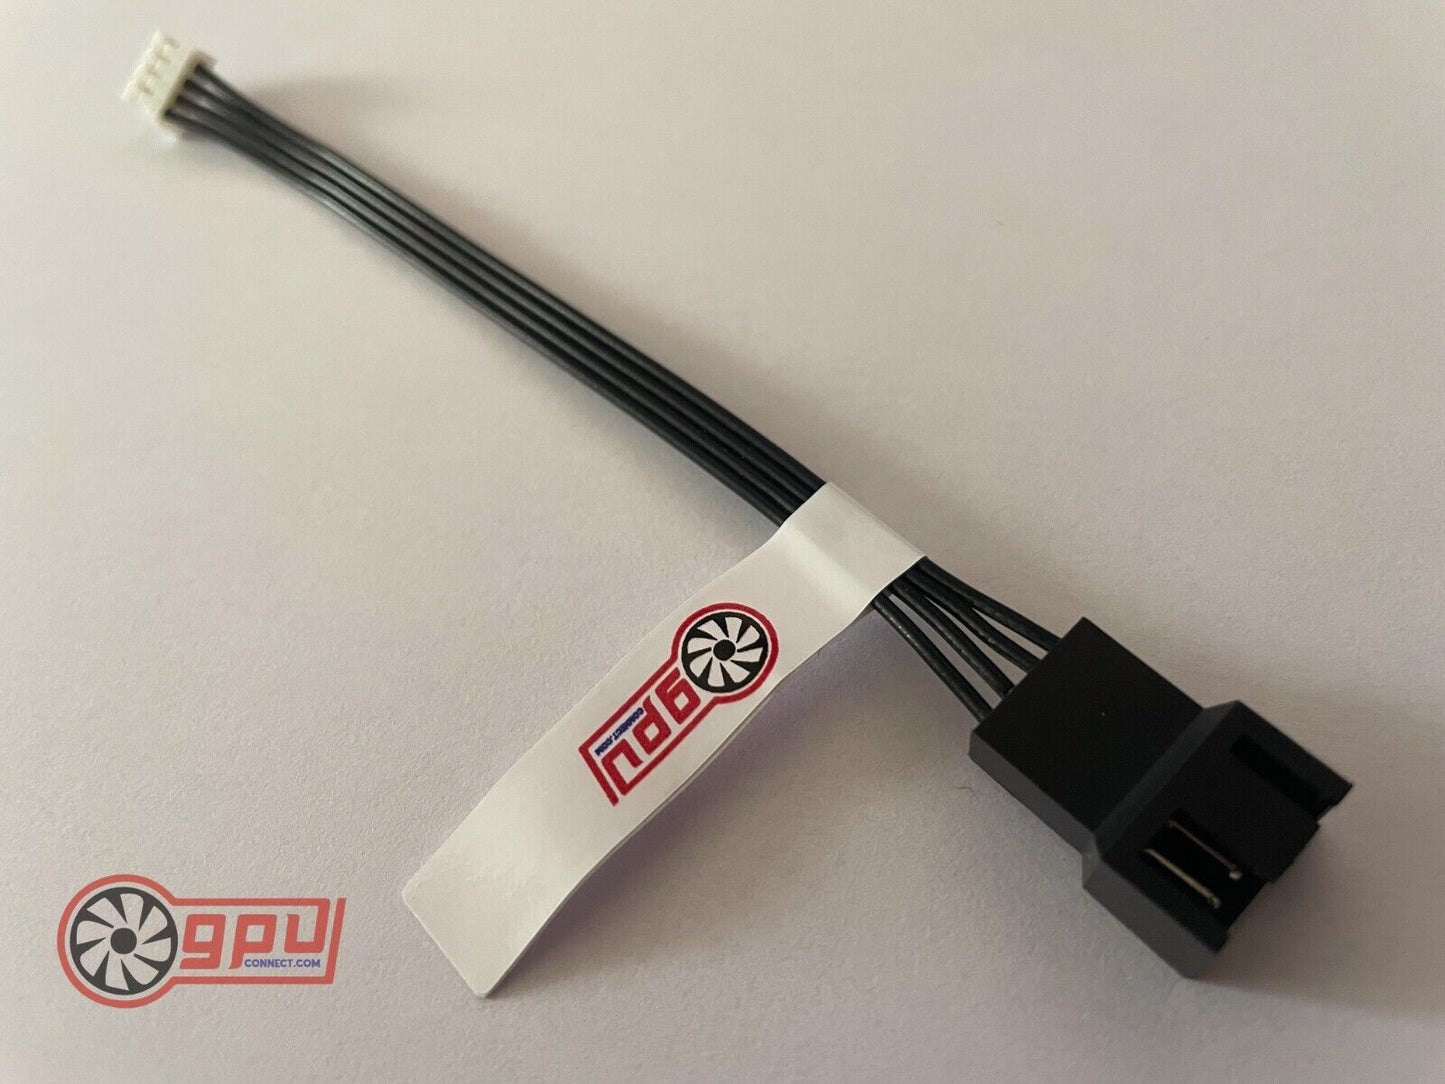 PH2.0 Mini 4Pin to PWM Fan GPU Graphics Cards Adapter Cable - 10cm (Black) - GPUCONNECT.COM